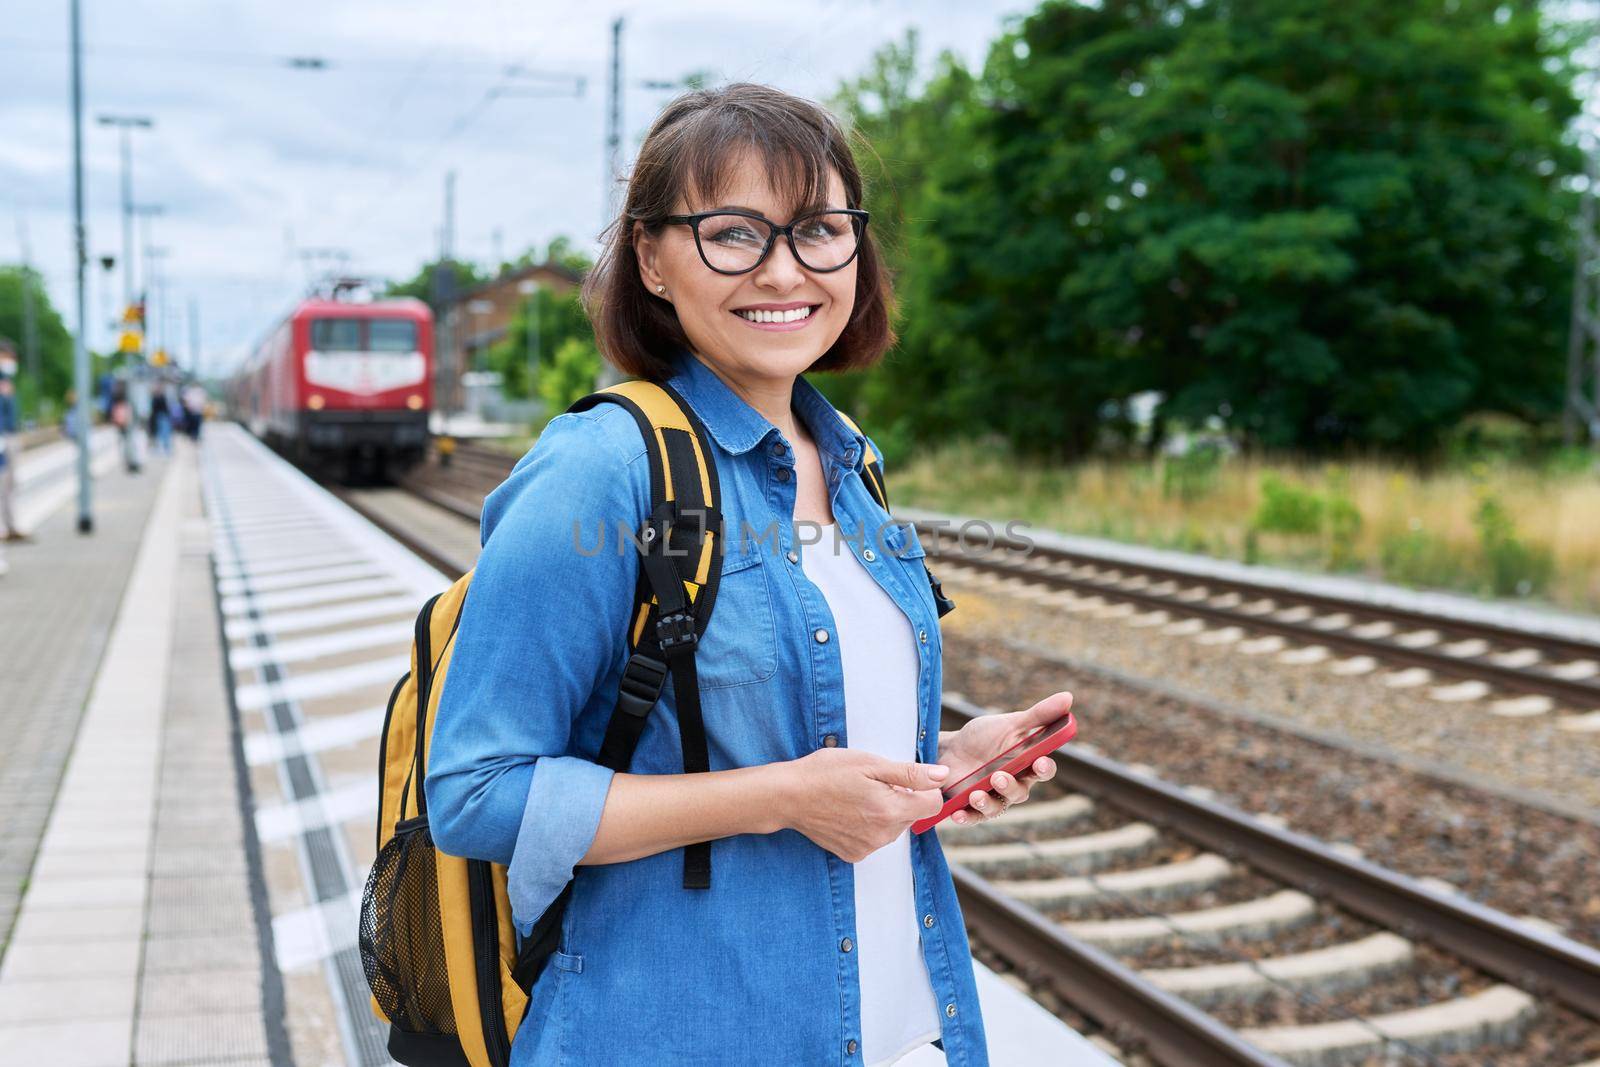 Woman passenger waiting for local train at station outdoor platform, smiling female looking at camera. Rail transport, passenger transportation, journey, tourism, travel, trip, people concept